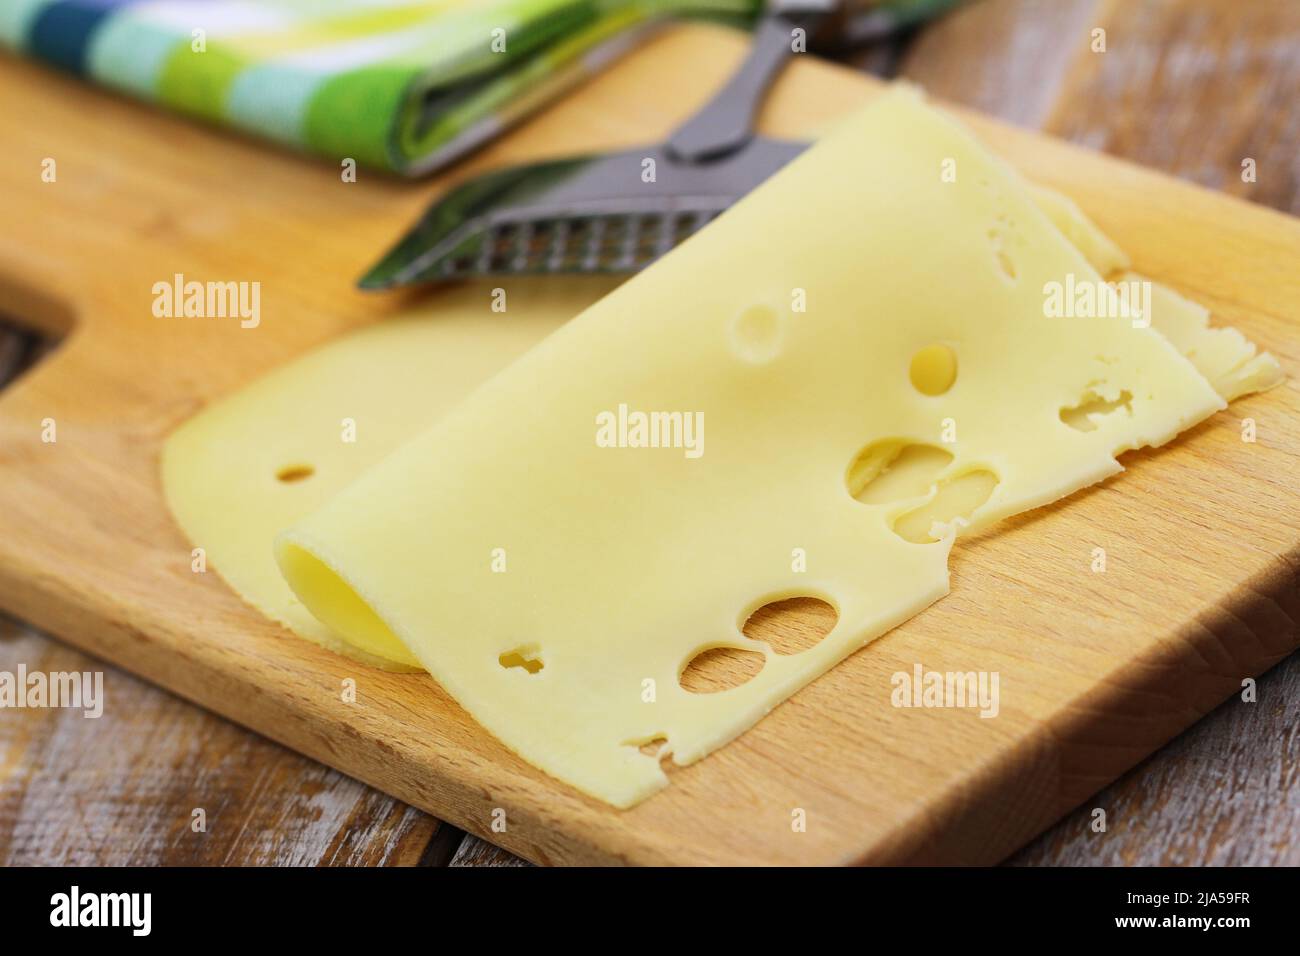 Two slices of tasty Swiss cheese on wooden board, closeup Stock Photo